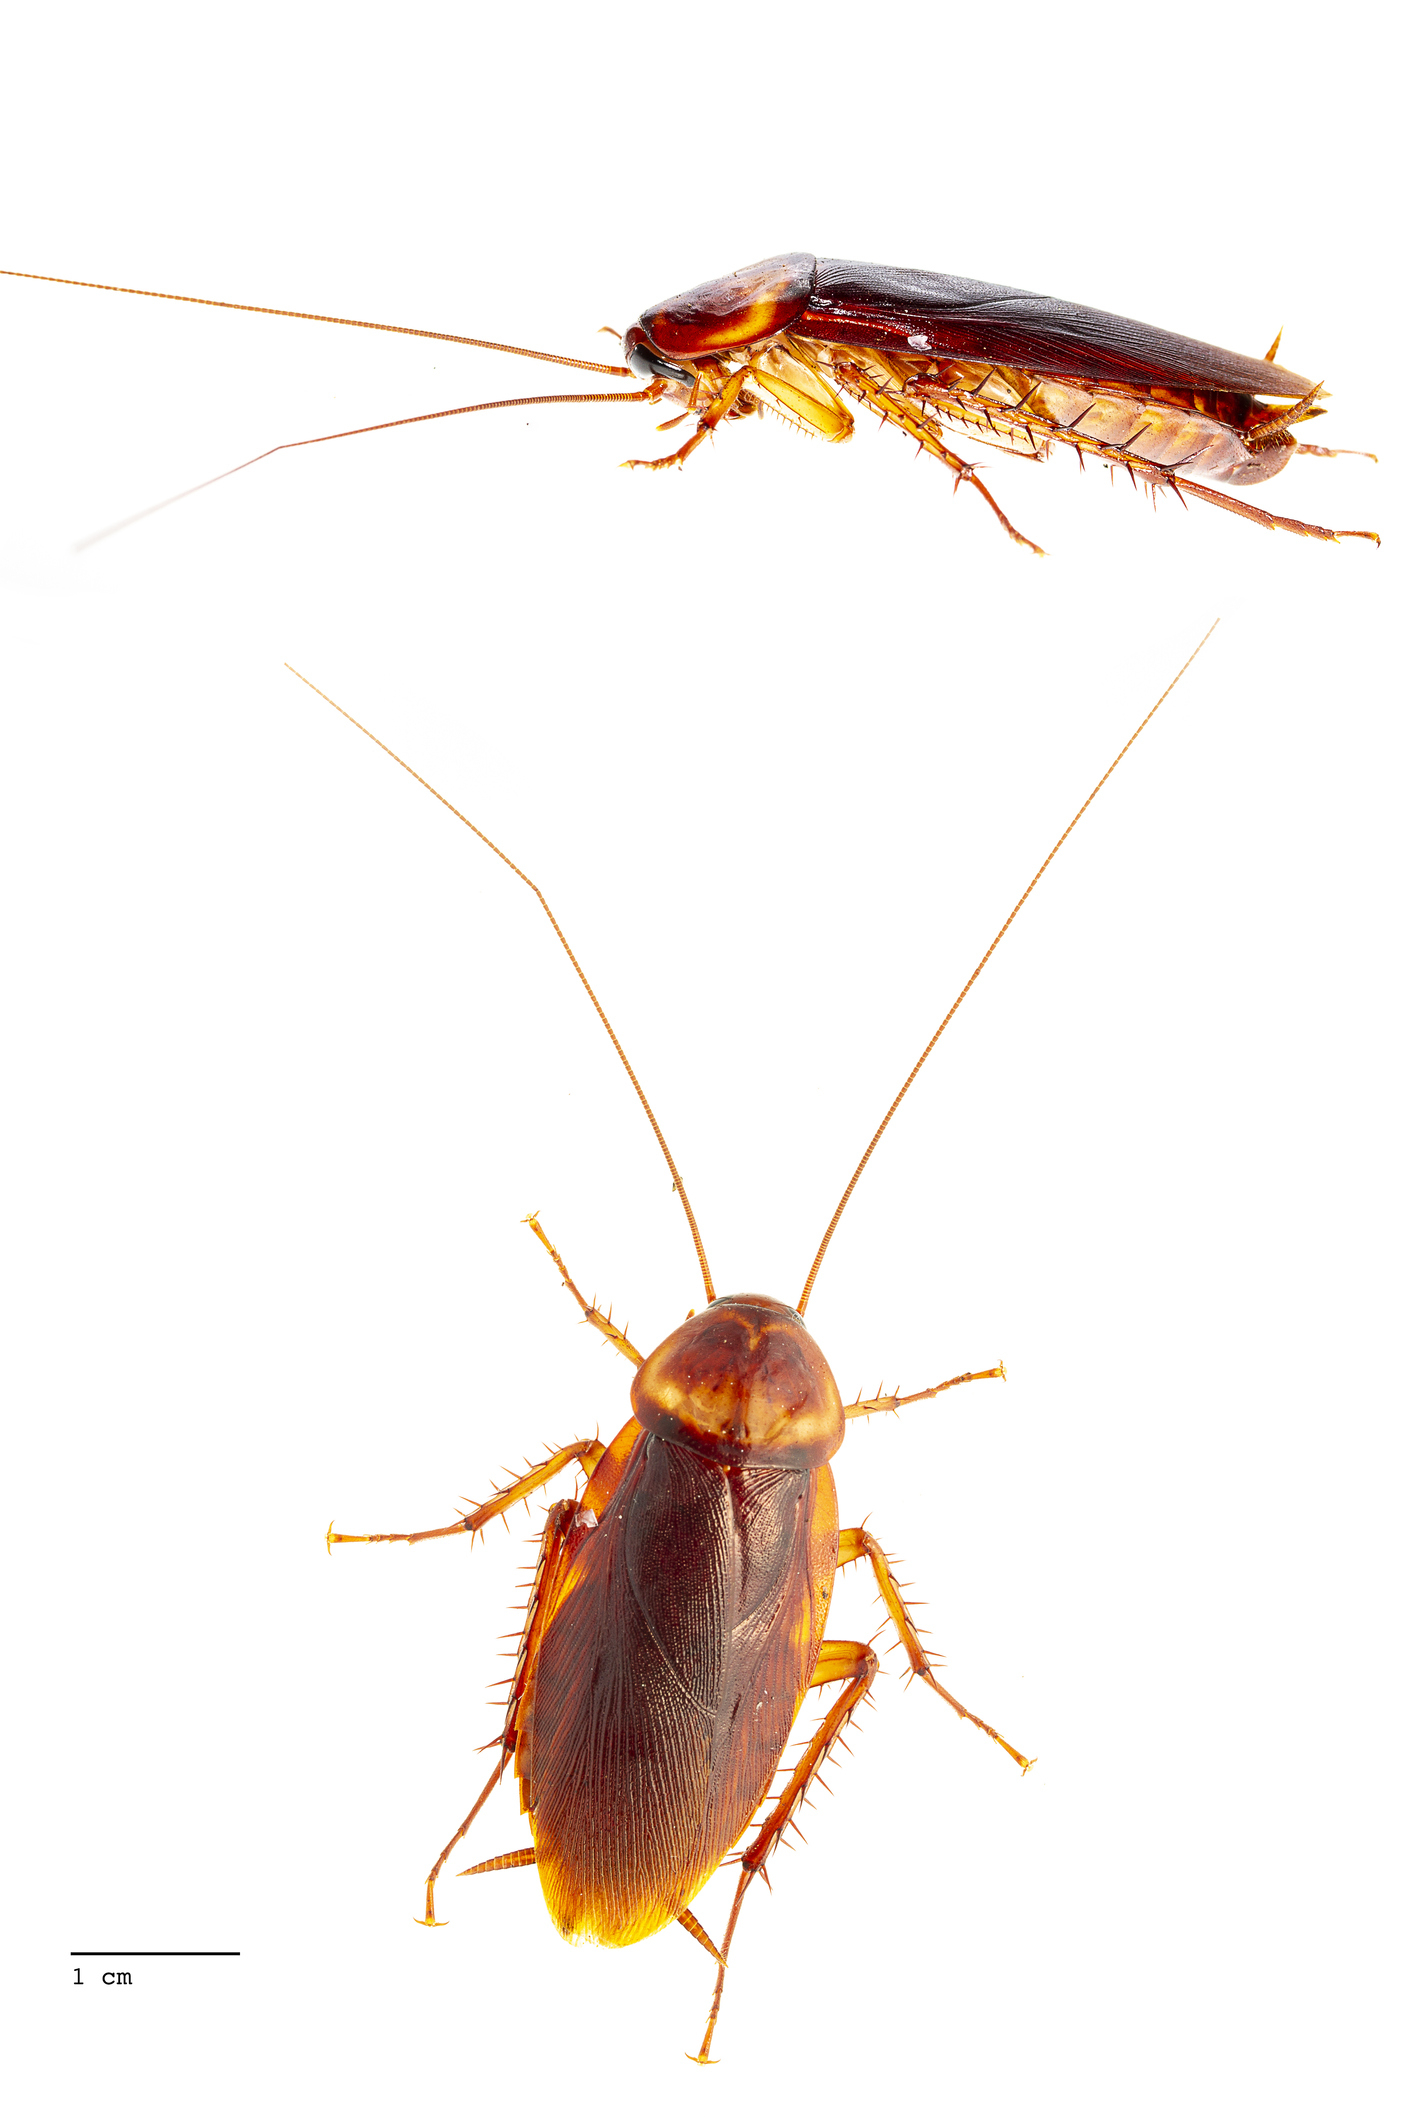 Two cockroaches isolated on white, one facing upright and the other upside down with a scale for size